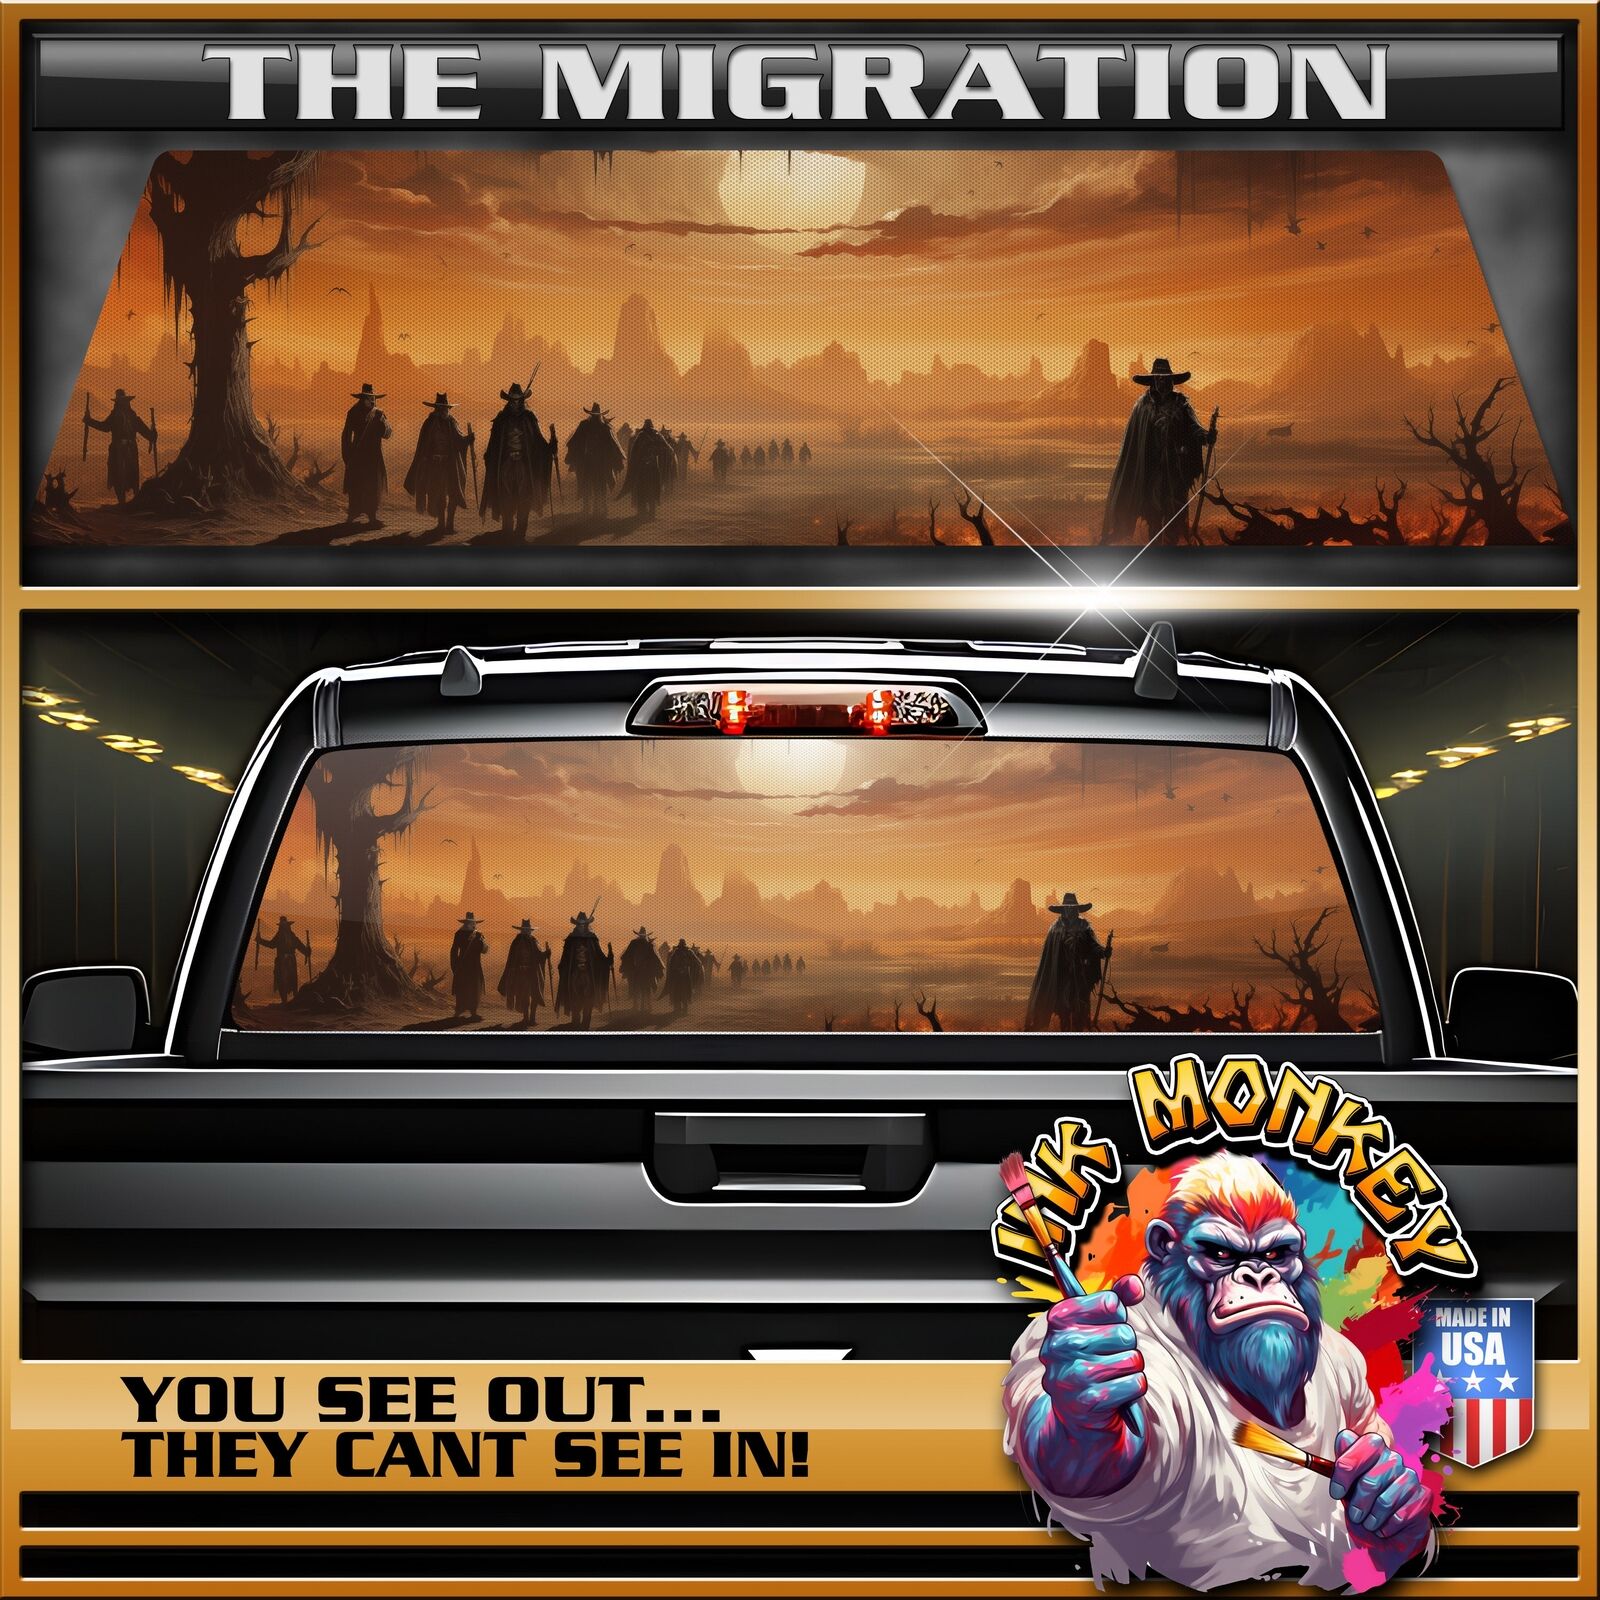 The Migration - Truck Back Window Graphics - Customizable